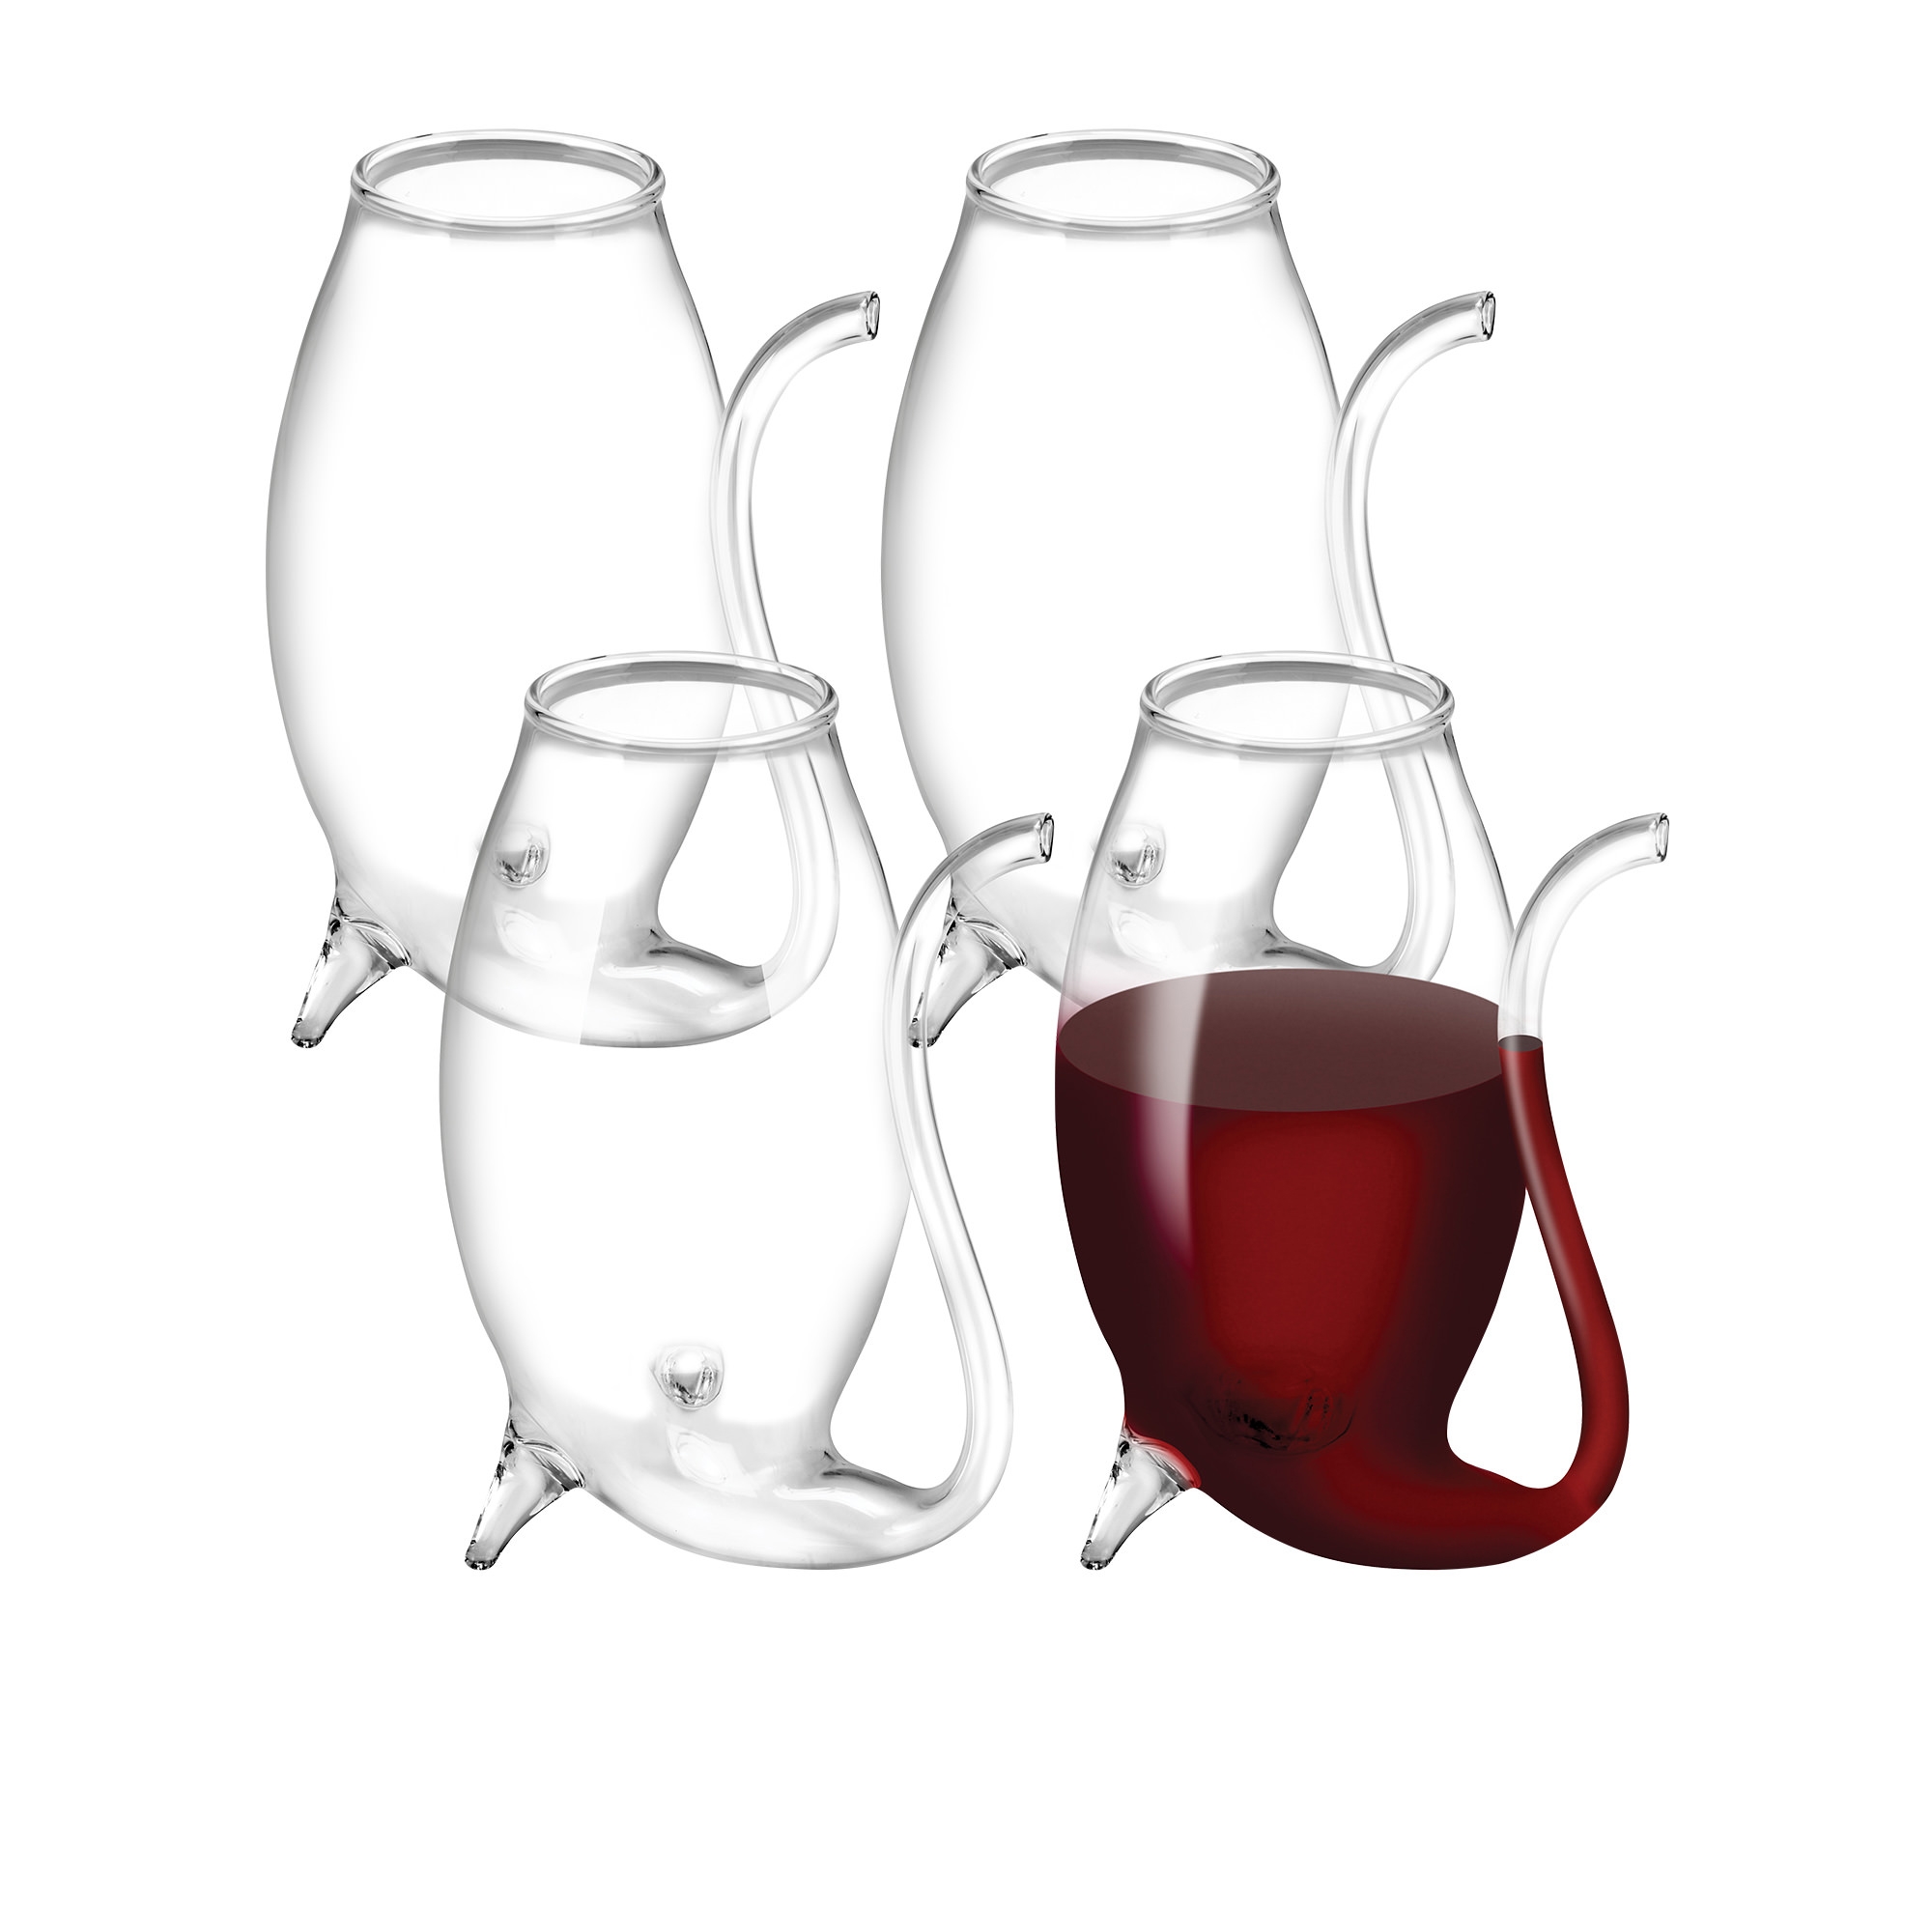 Avanti Glass Port Sippers Set of 4 Image 1